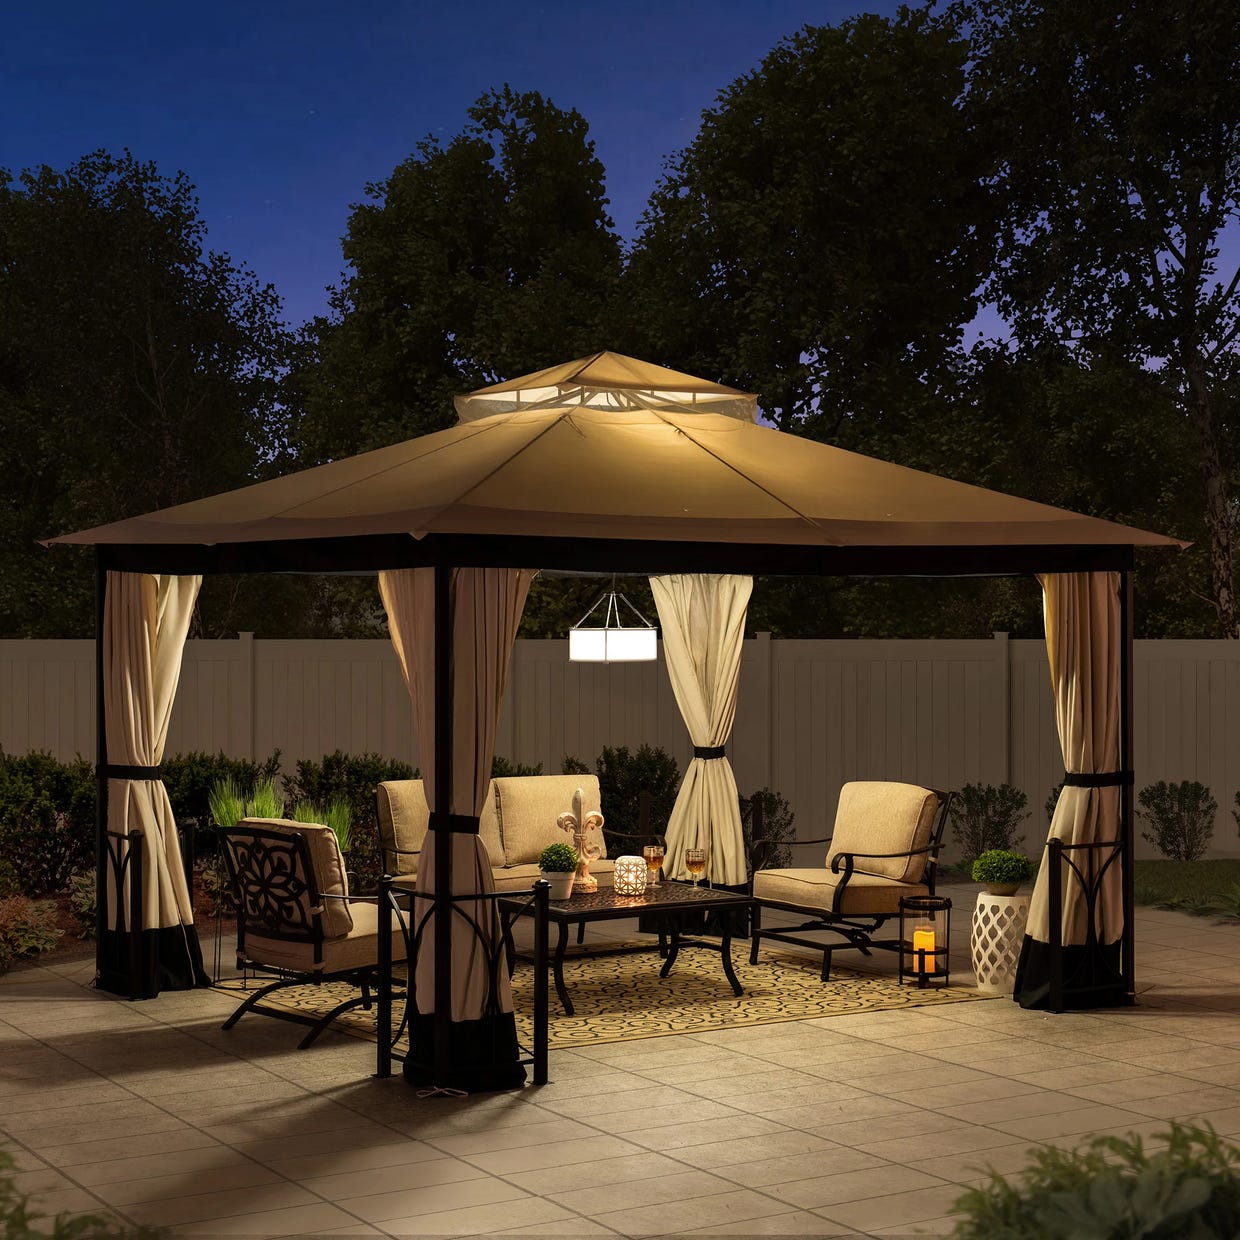 A lit gazebo with curtains, outdoor furniture including chairs, a sofa, and a coffee table, set on a patio at dusk.